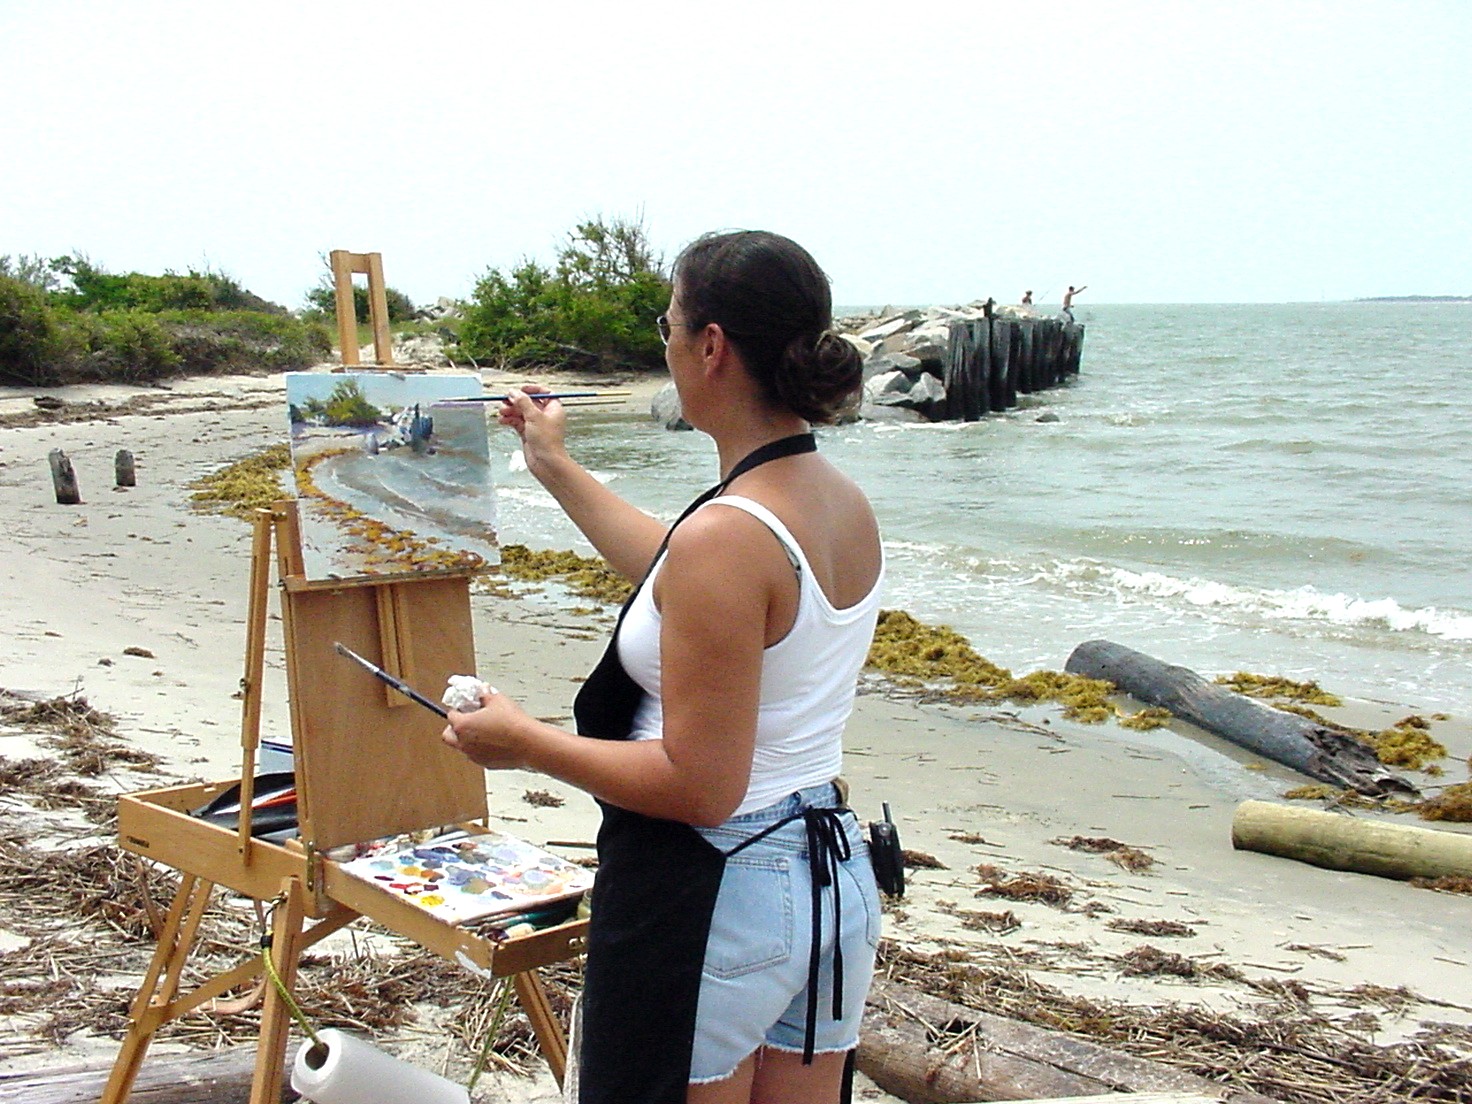 [COPA_painter_Mary_Hoffman_on_SI_6.19.07_pic_it.jpg]